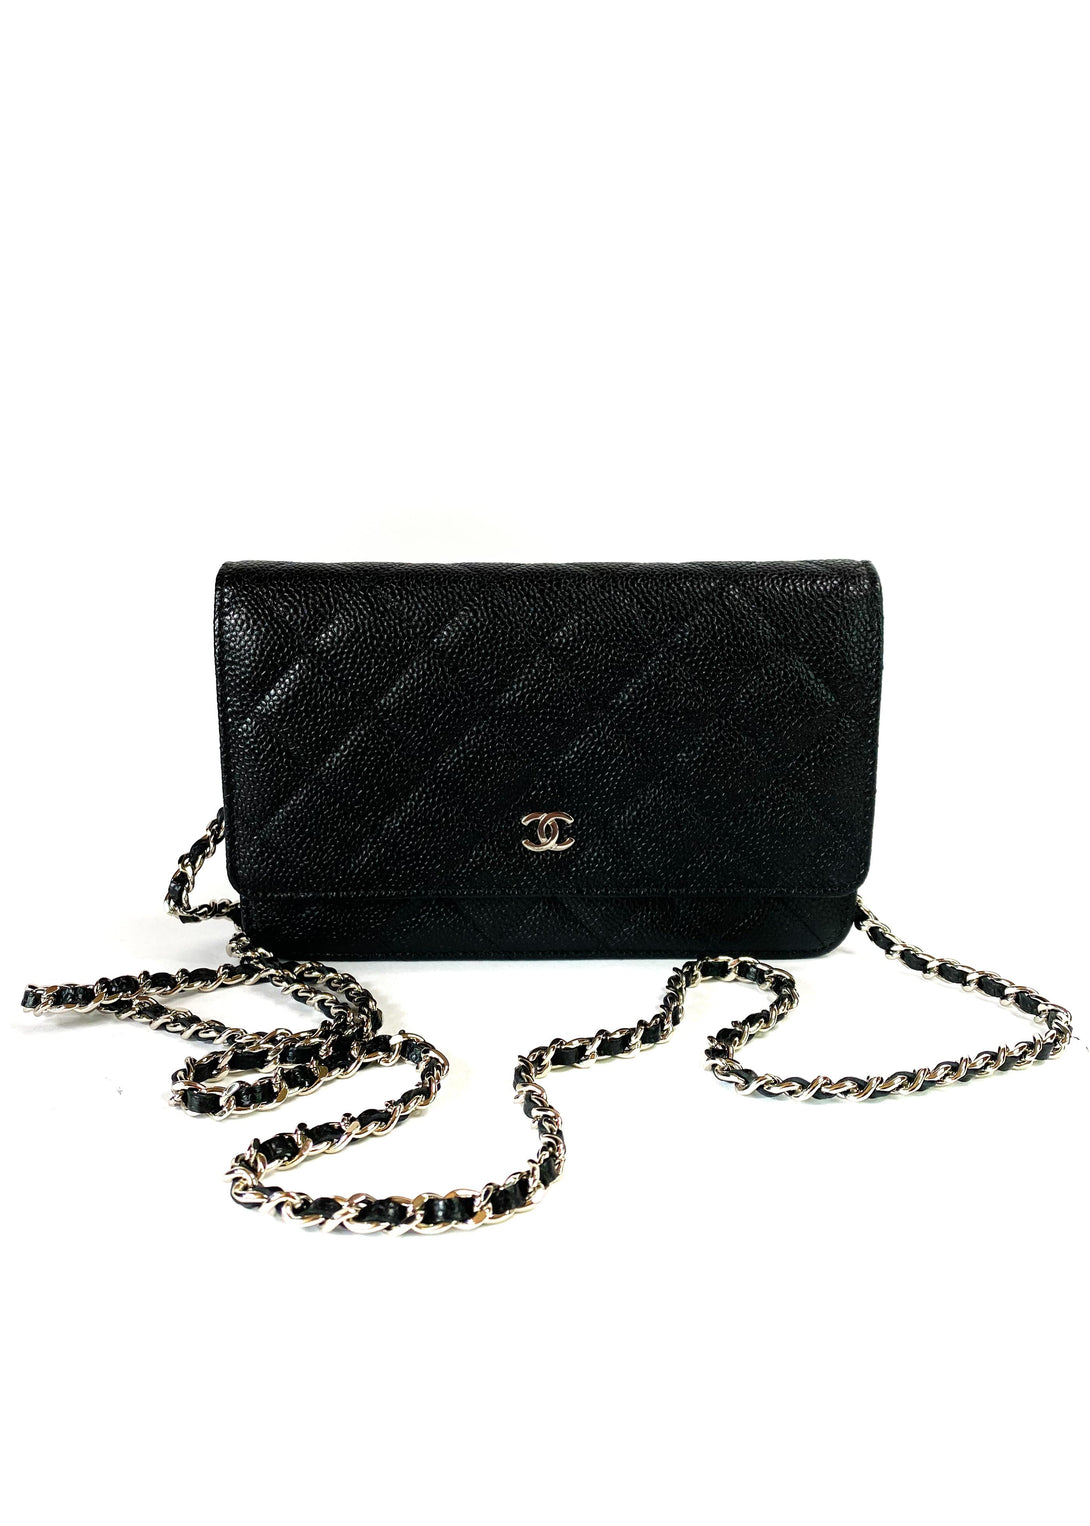 Chanel Black Caviar Leather Wallet on Chain - As Seen on Instagram 22.07.2020 - Siopaella Designer Exchange